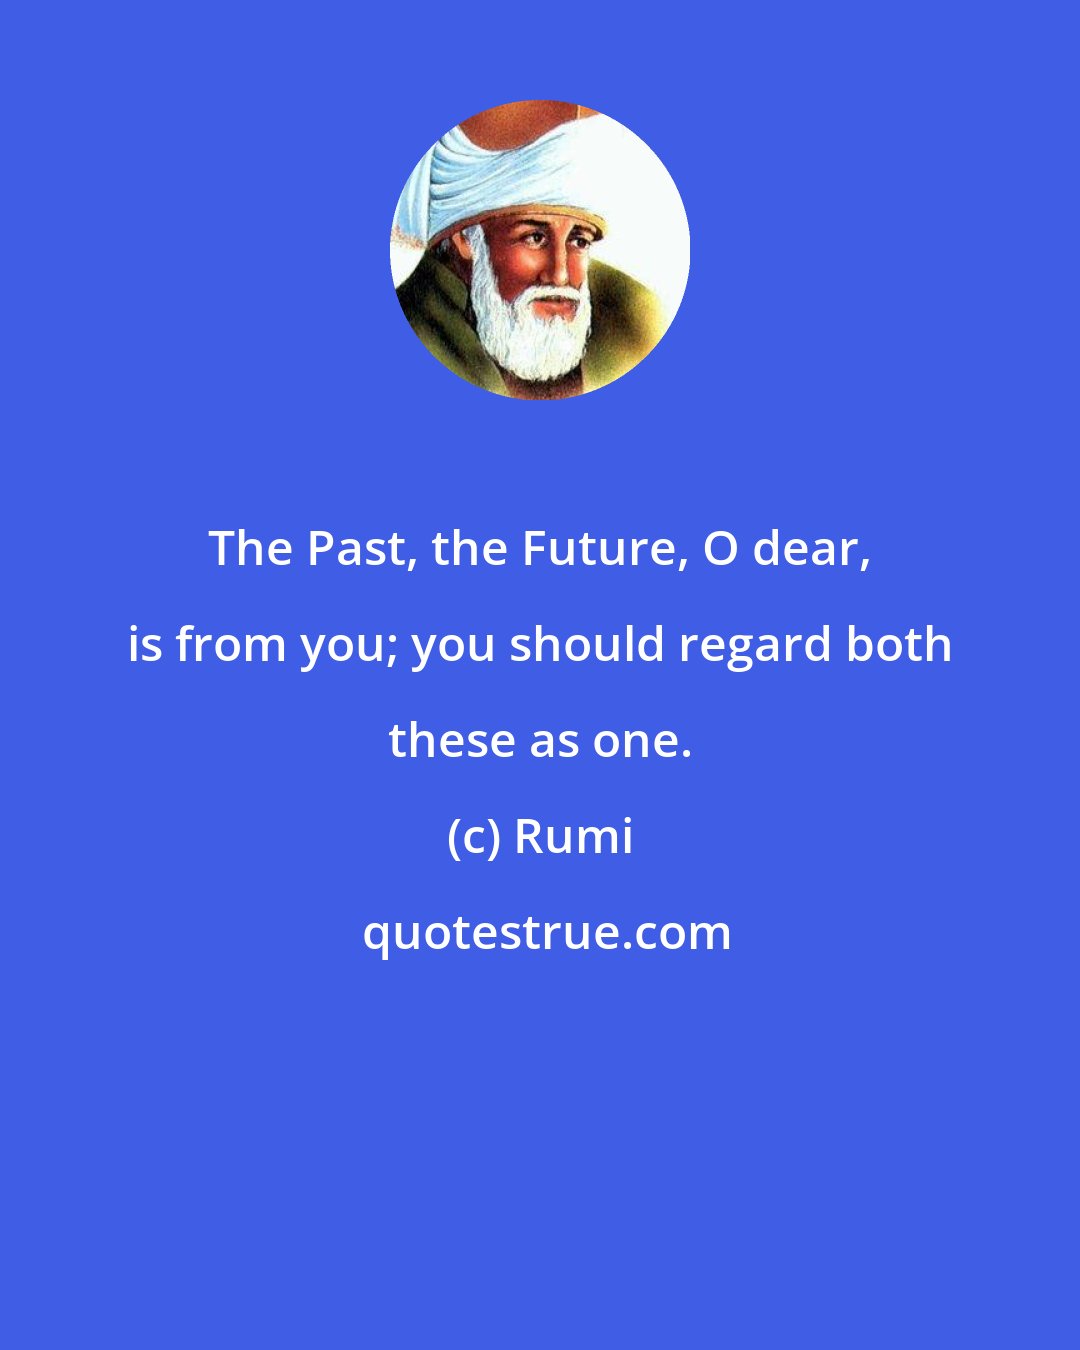 Rumi: The Past, the Future, O dear, is from you; you should regard both these as one.